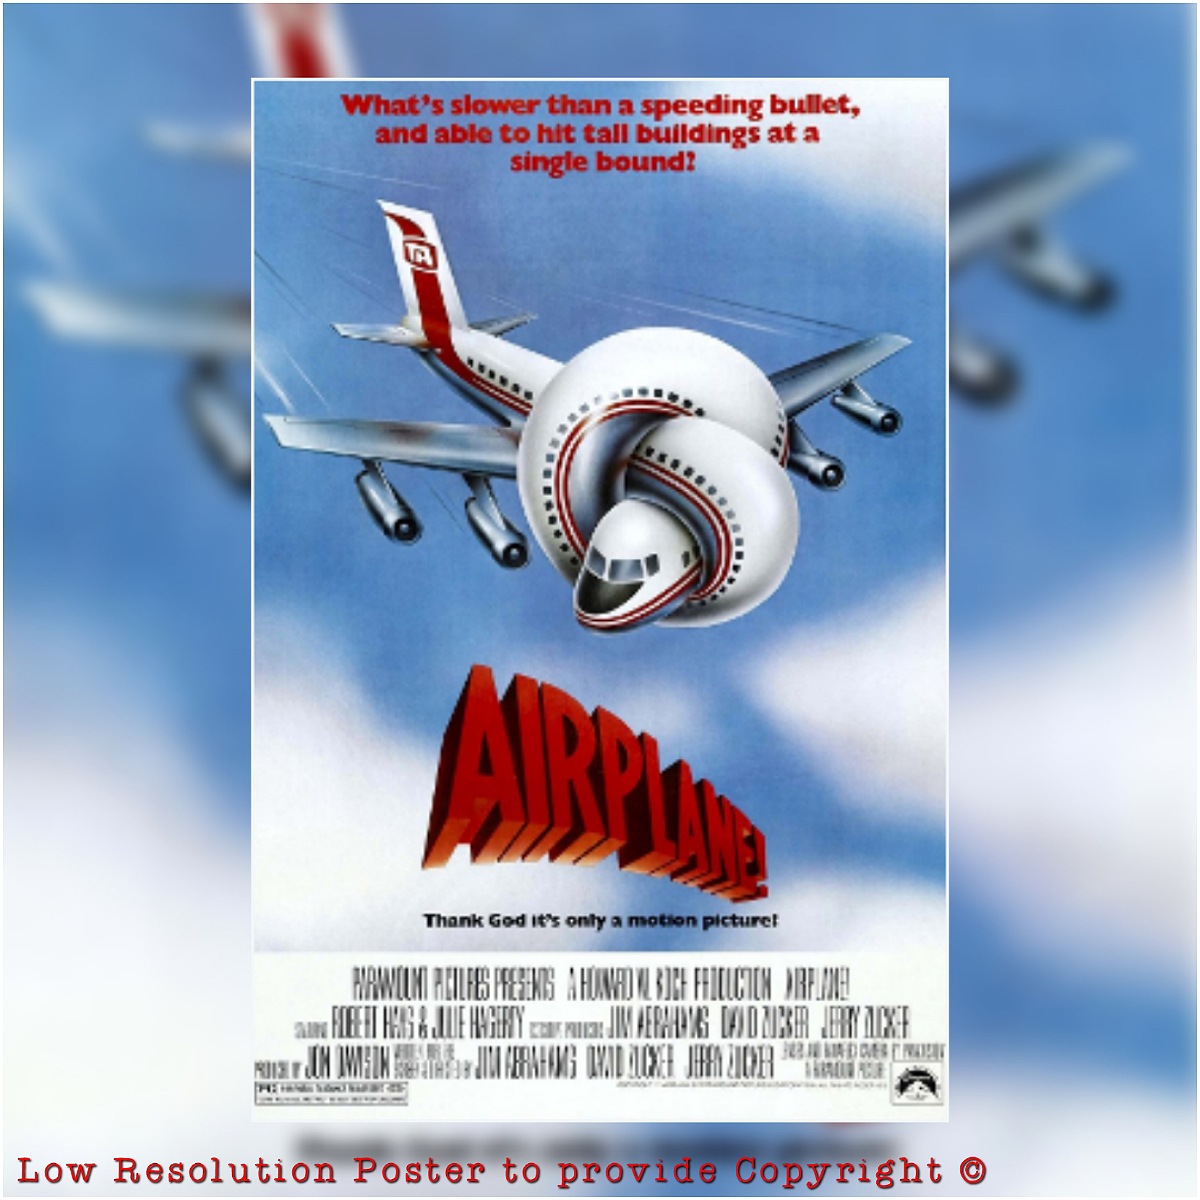 The funny movie ‚Airplane‘ – With Leslie Nielsen